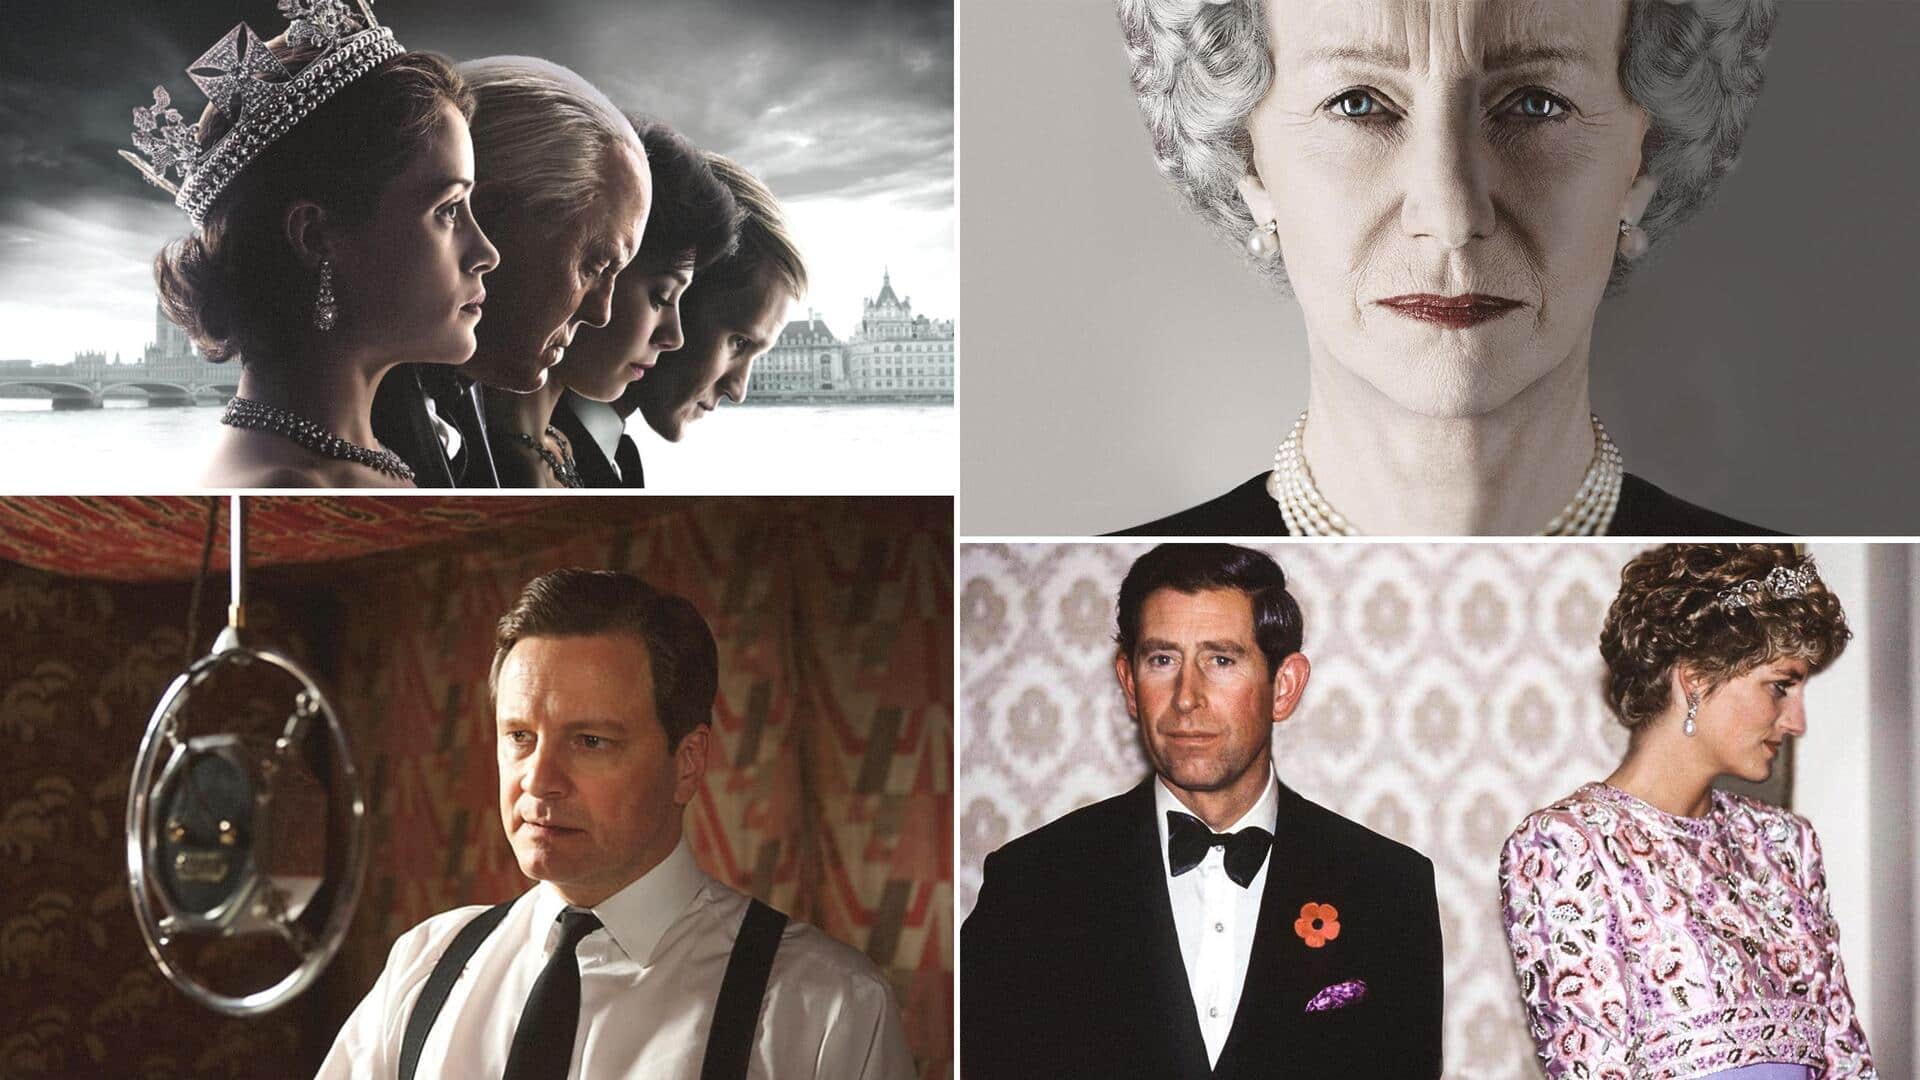 Top movies, shows based on the British Royal Family